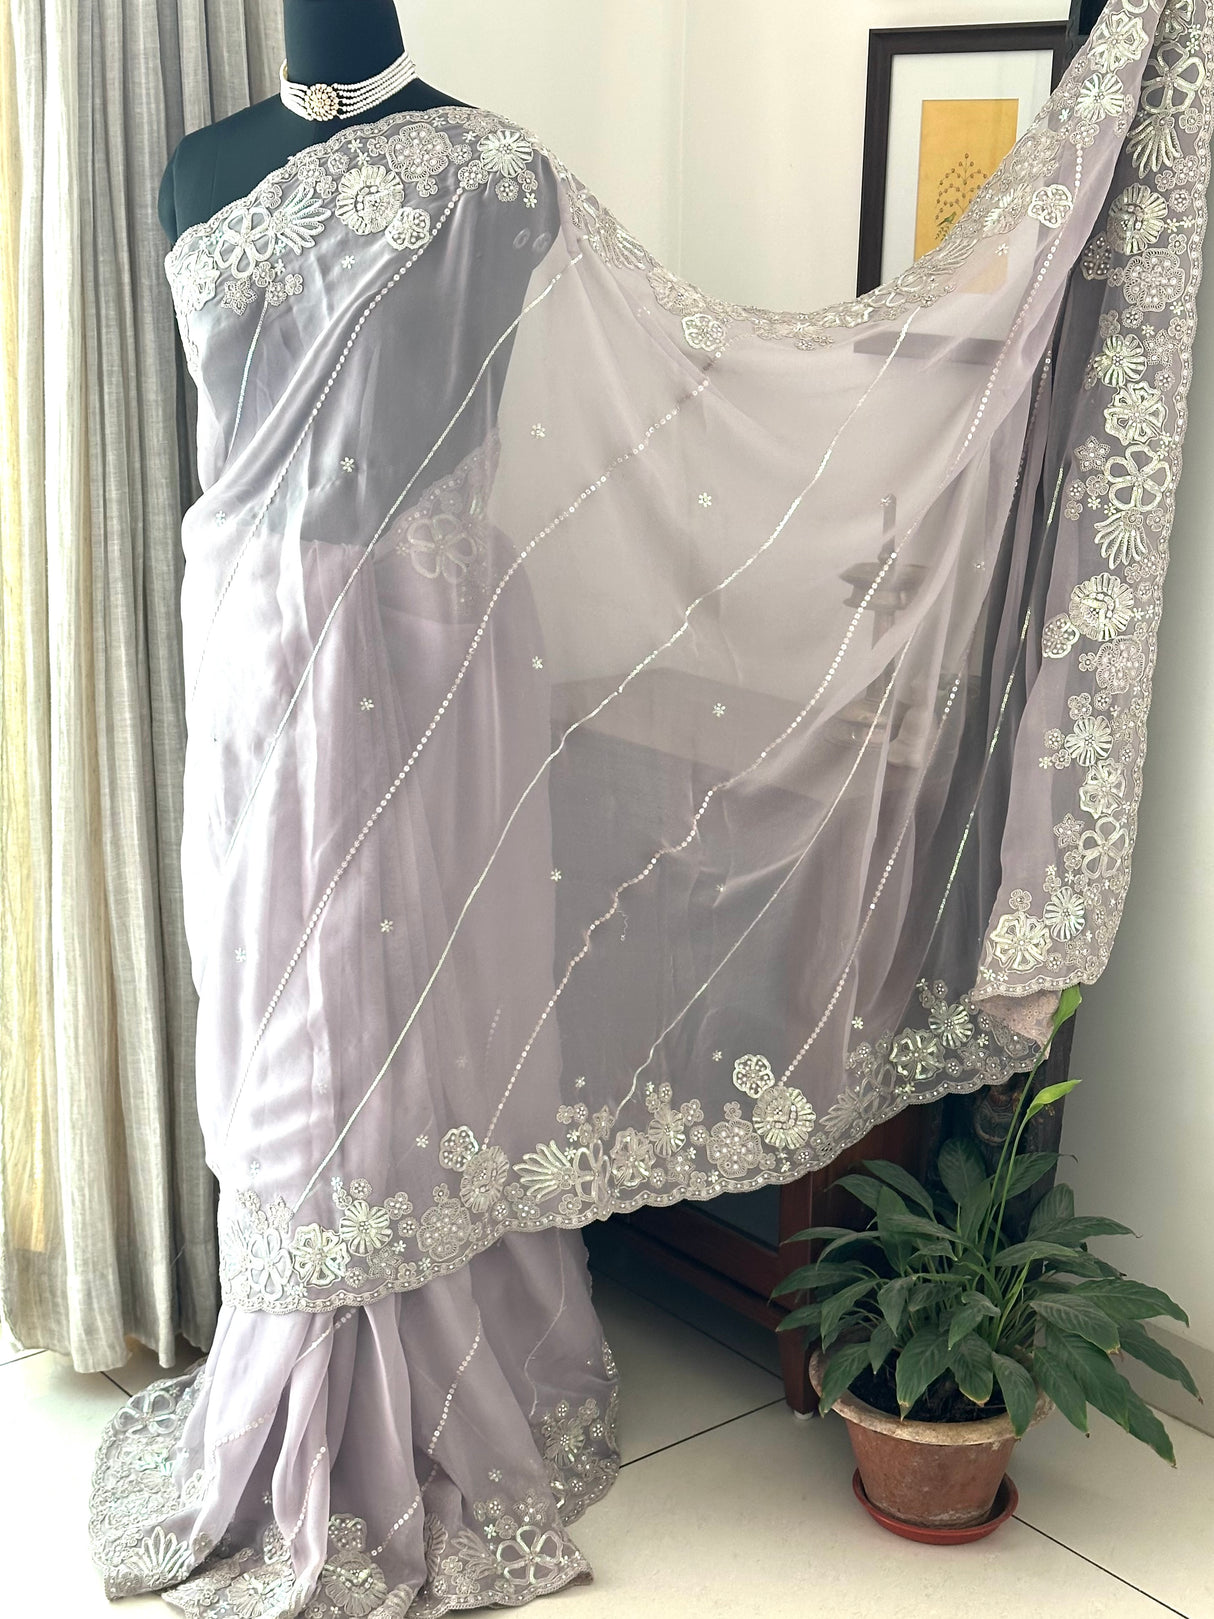 Light Lavender Georgette saree embellished with machine embroidery